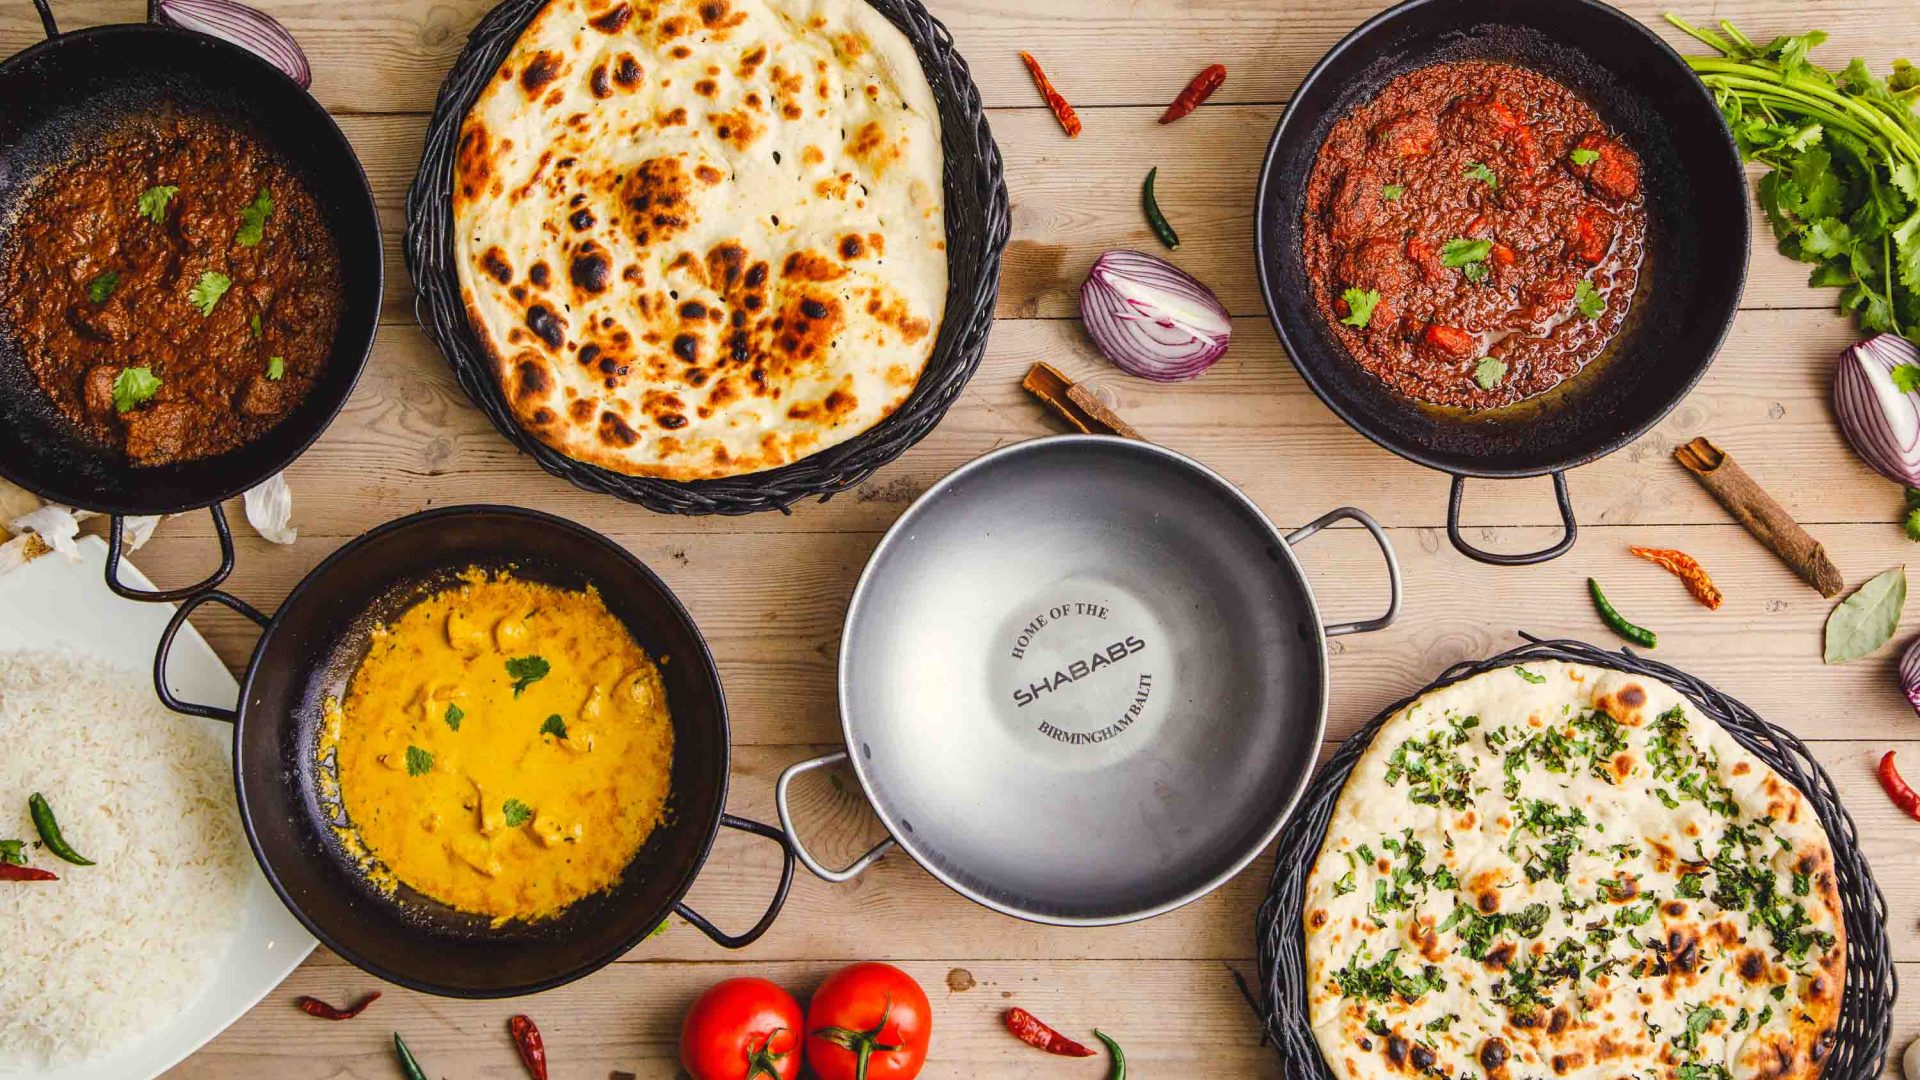 Balti dishes with naan.